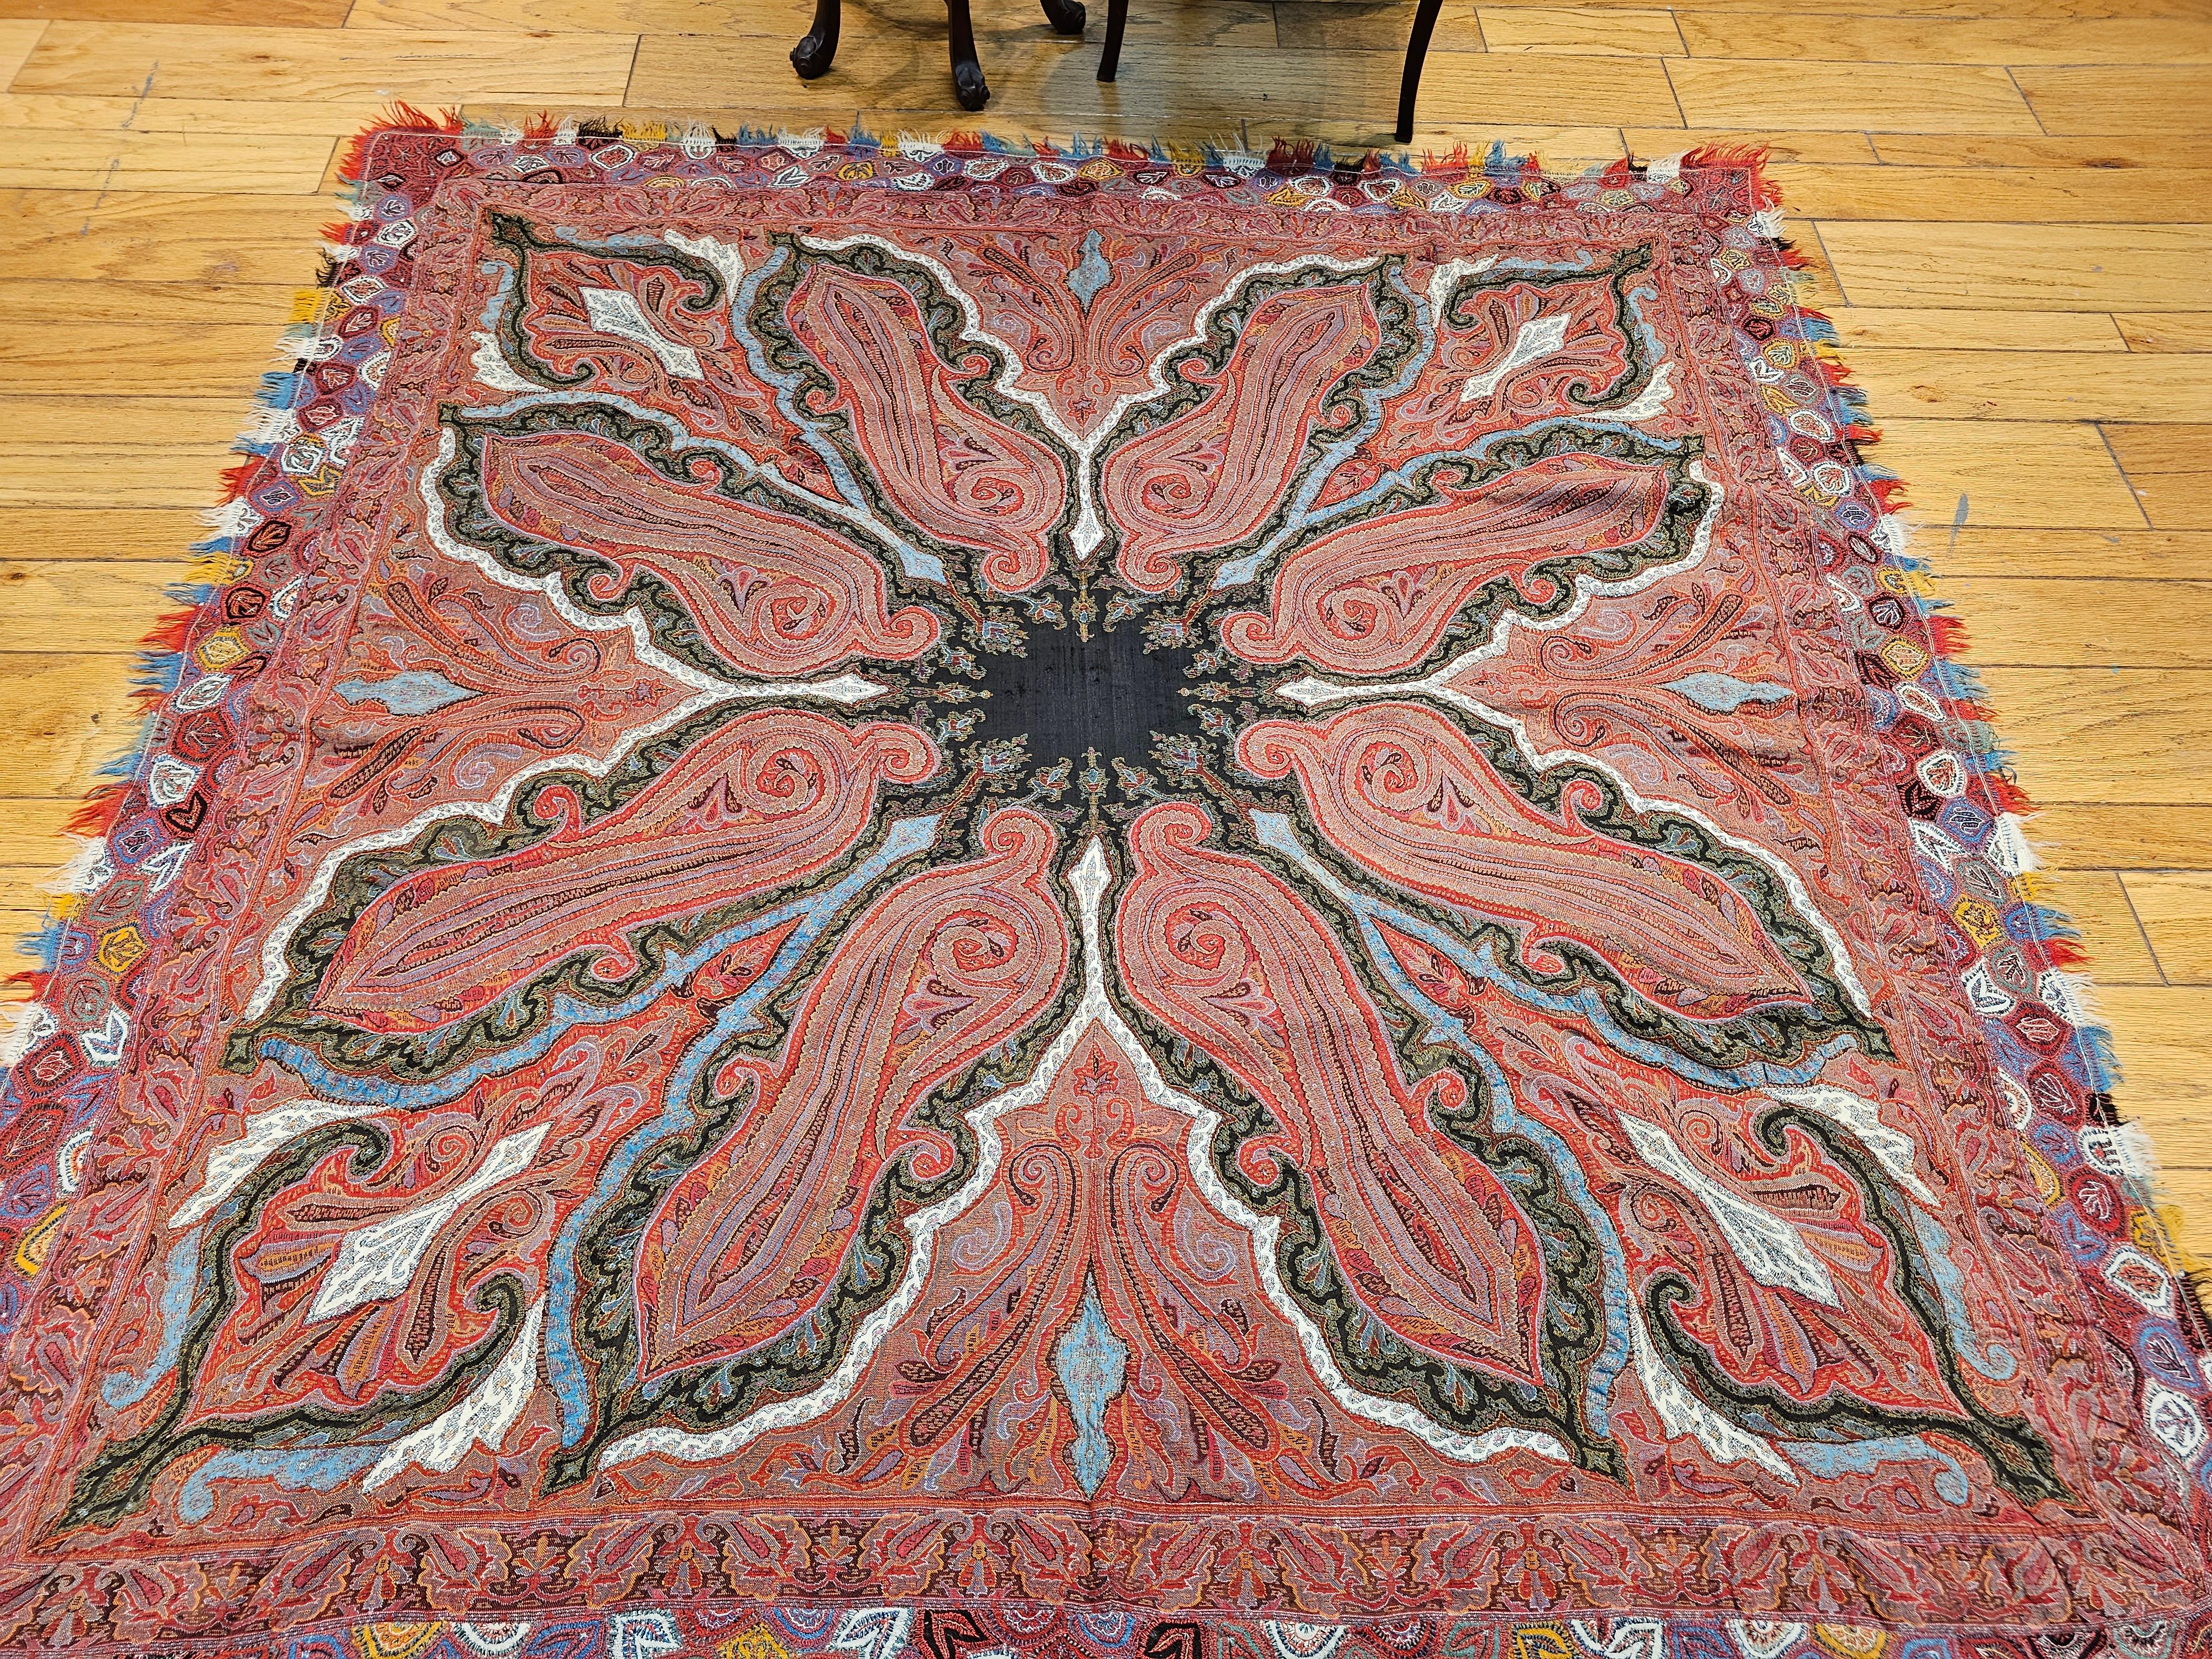 Mid 19th Century Hand Embroidered “Kashmiri Pieced Shawl” in “Butterfly” Pattern For Sale 10